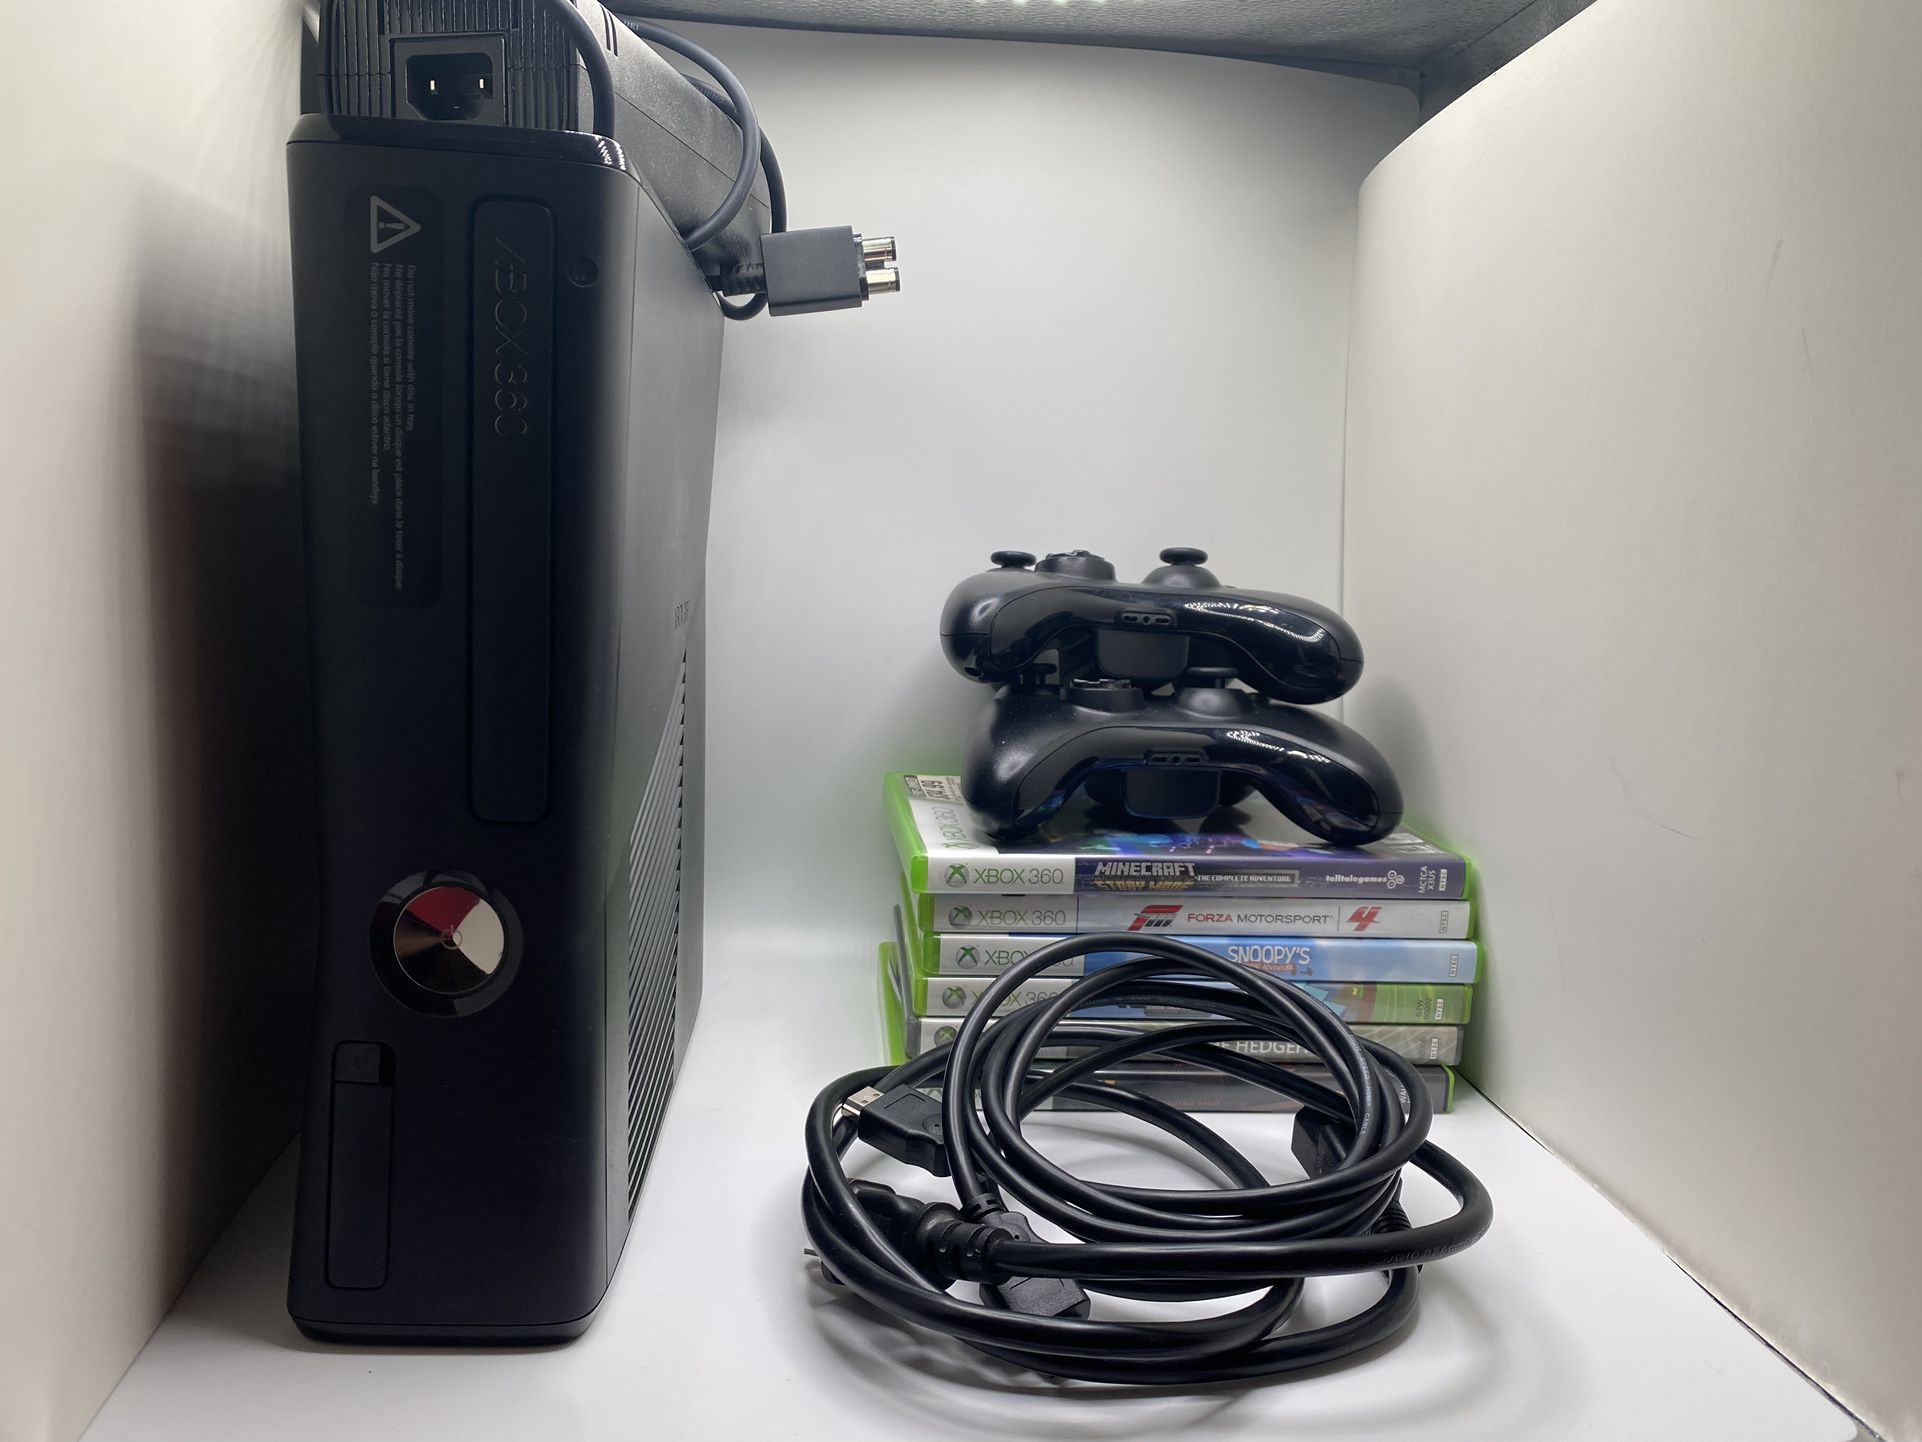 Xbox 360 Slim Black 250 GB (With Games included)